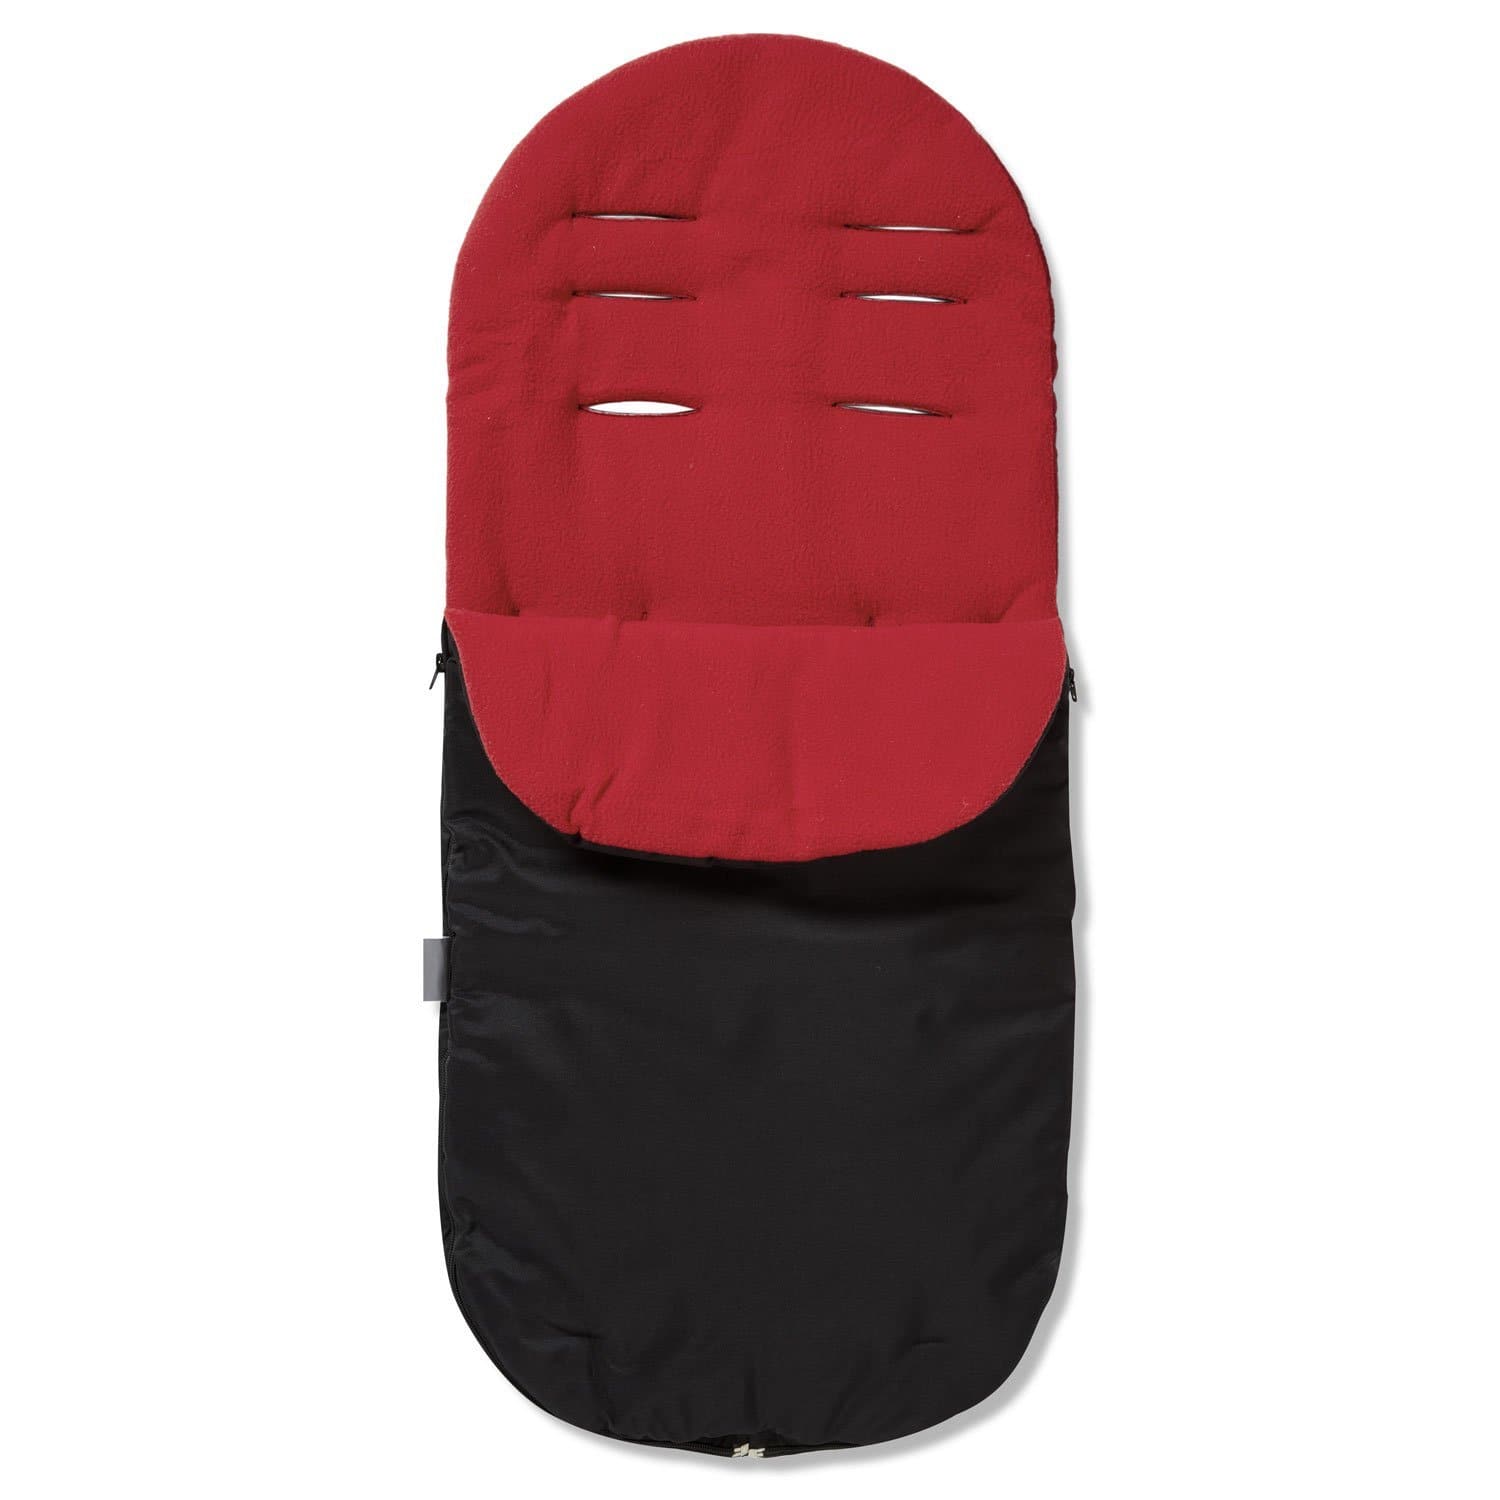 Footmuff / Cosy Toes Compatible with NeoNato - Red / Fits All Models | For Your Little One